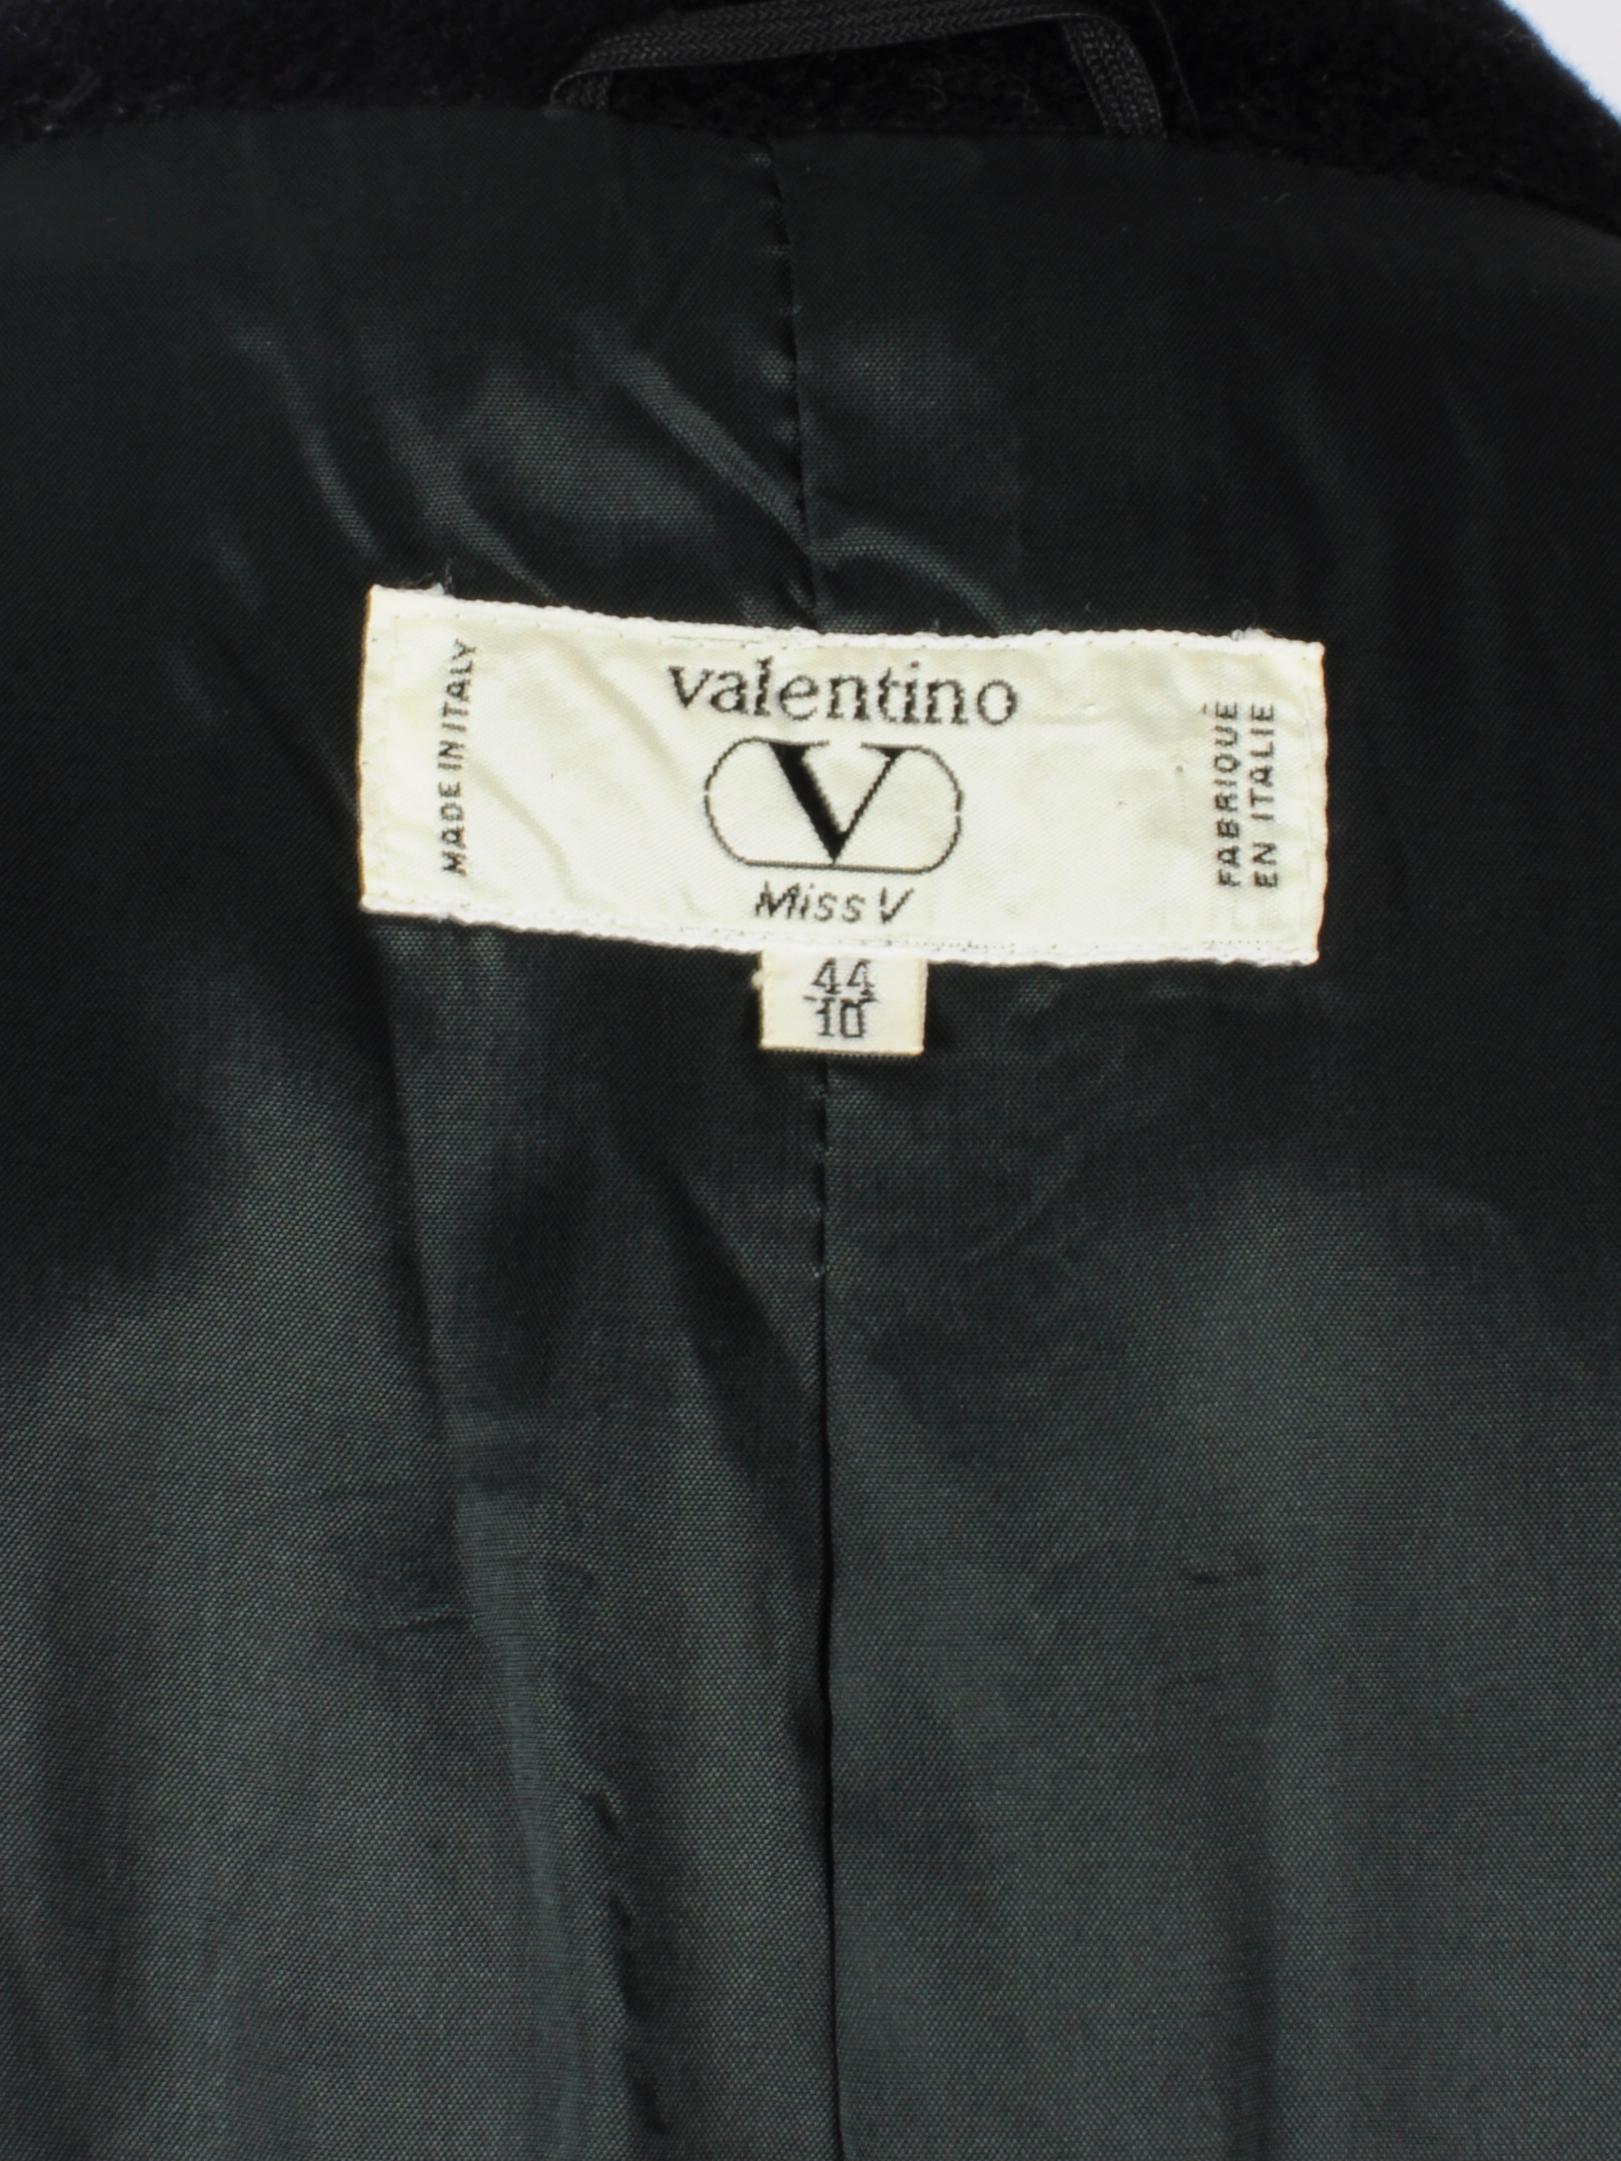 Valentino Miss V Coat Wool and Cashmere with Golden Buttons 1990s For Sale 5